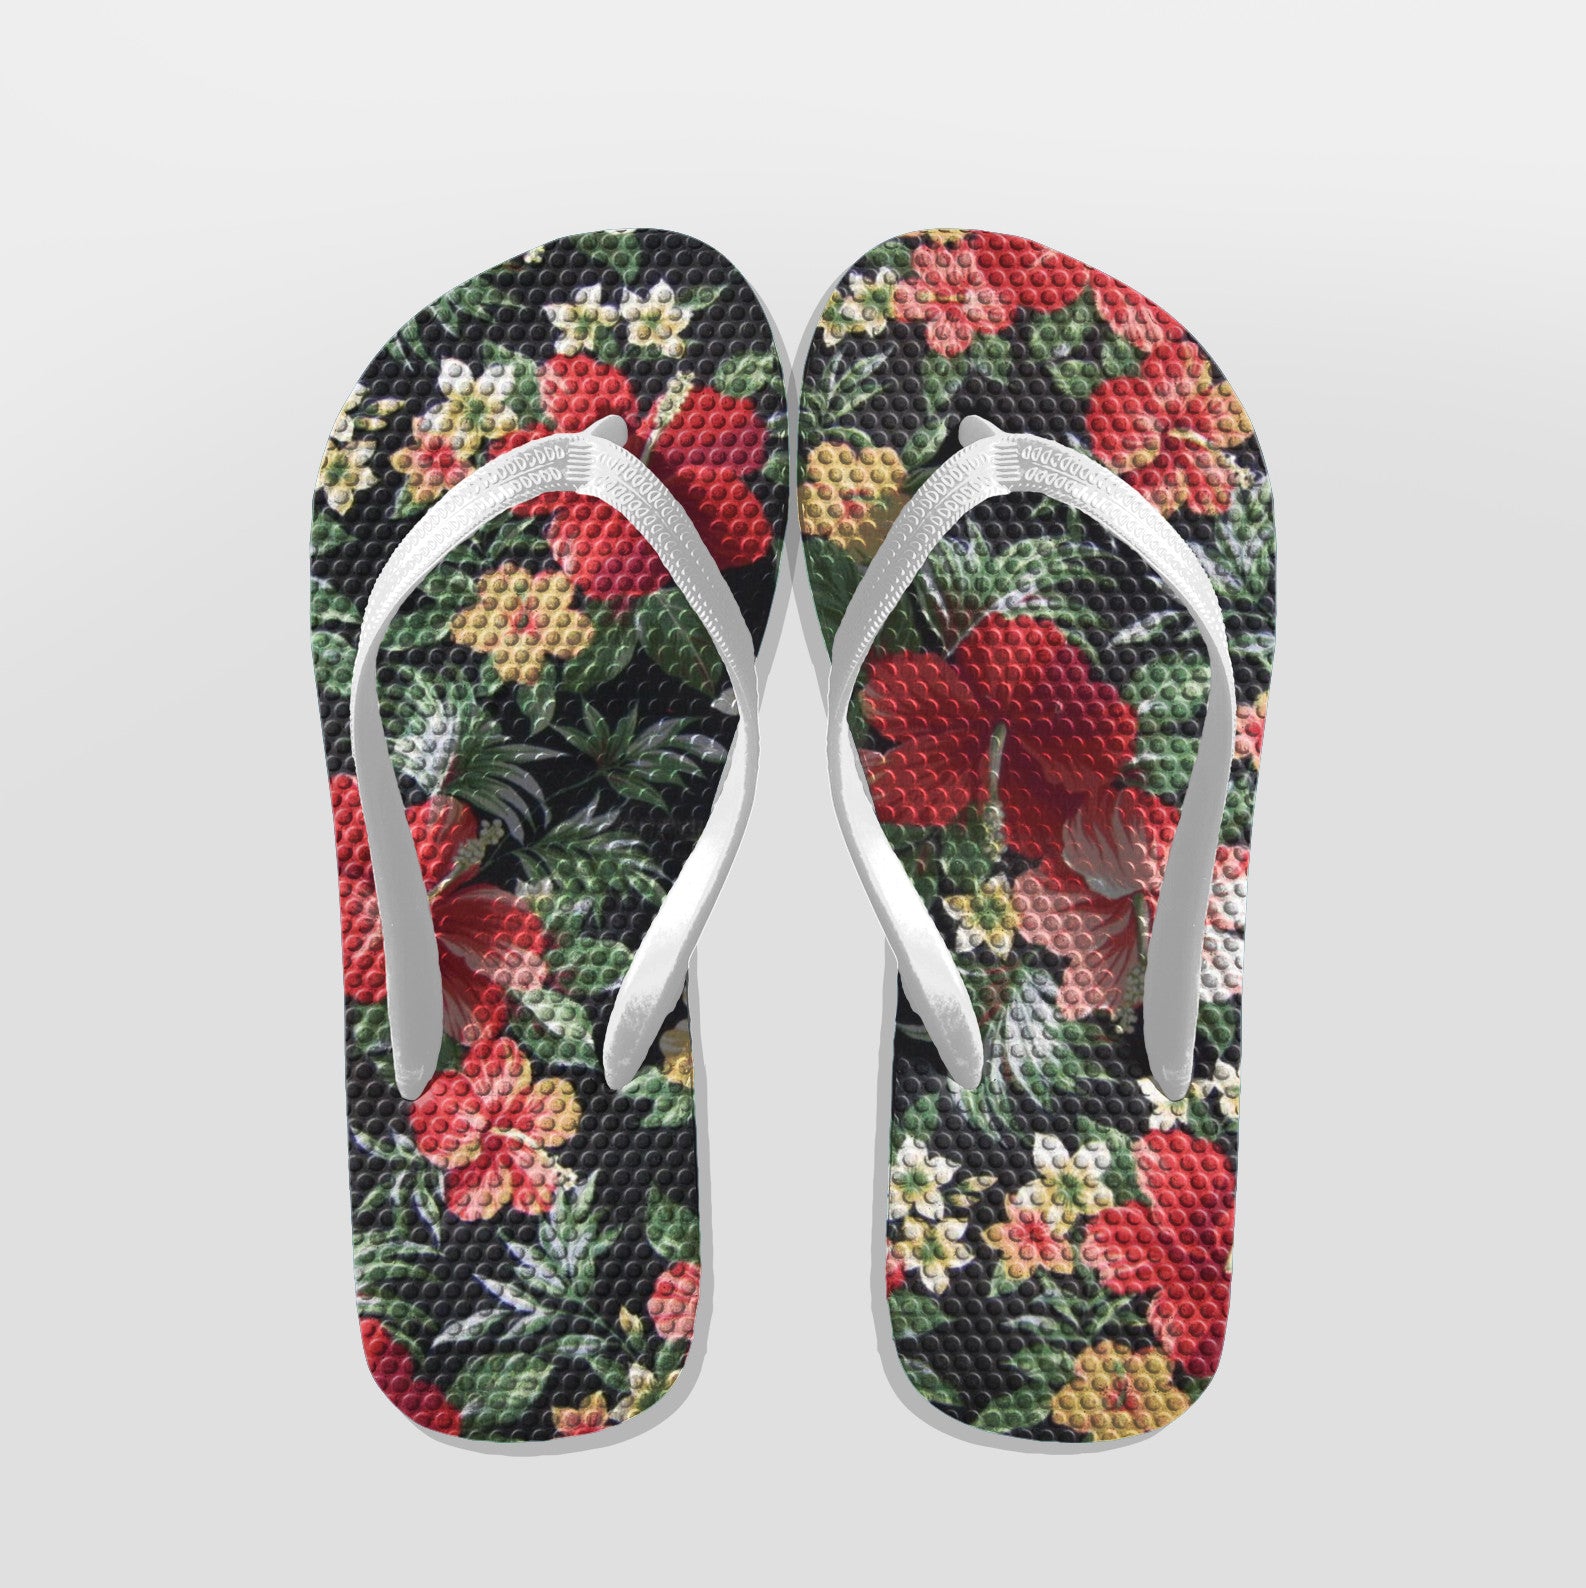 Download *Free Product* Flip Flops Mock Up - TheApparelGuy